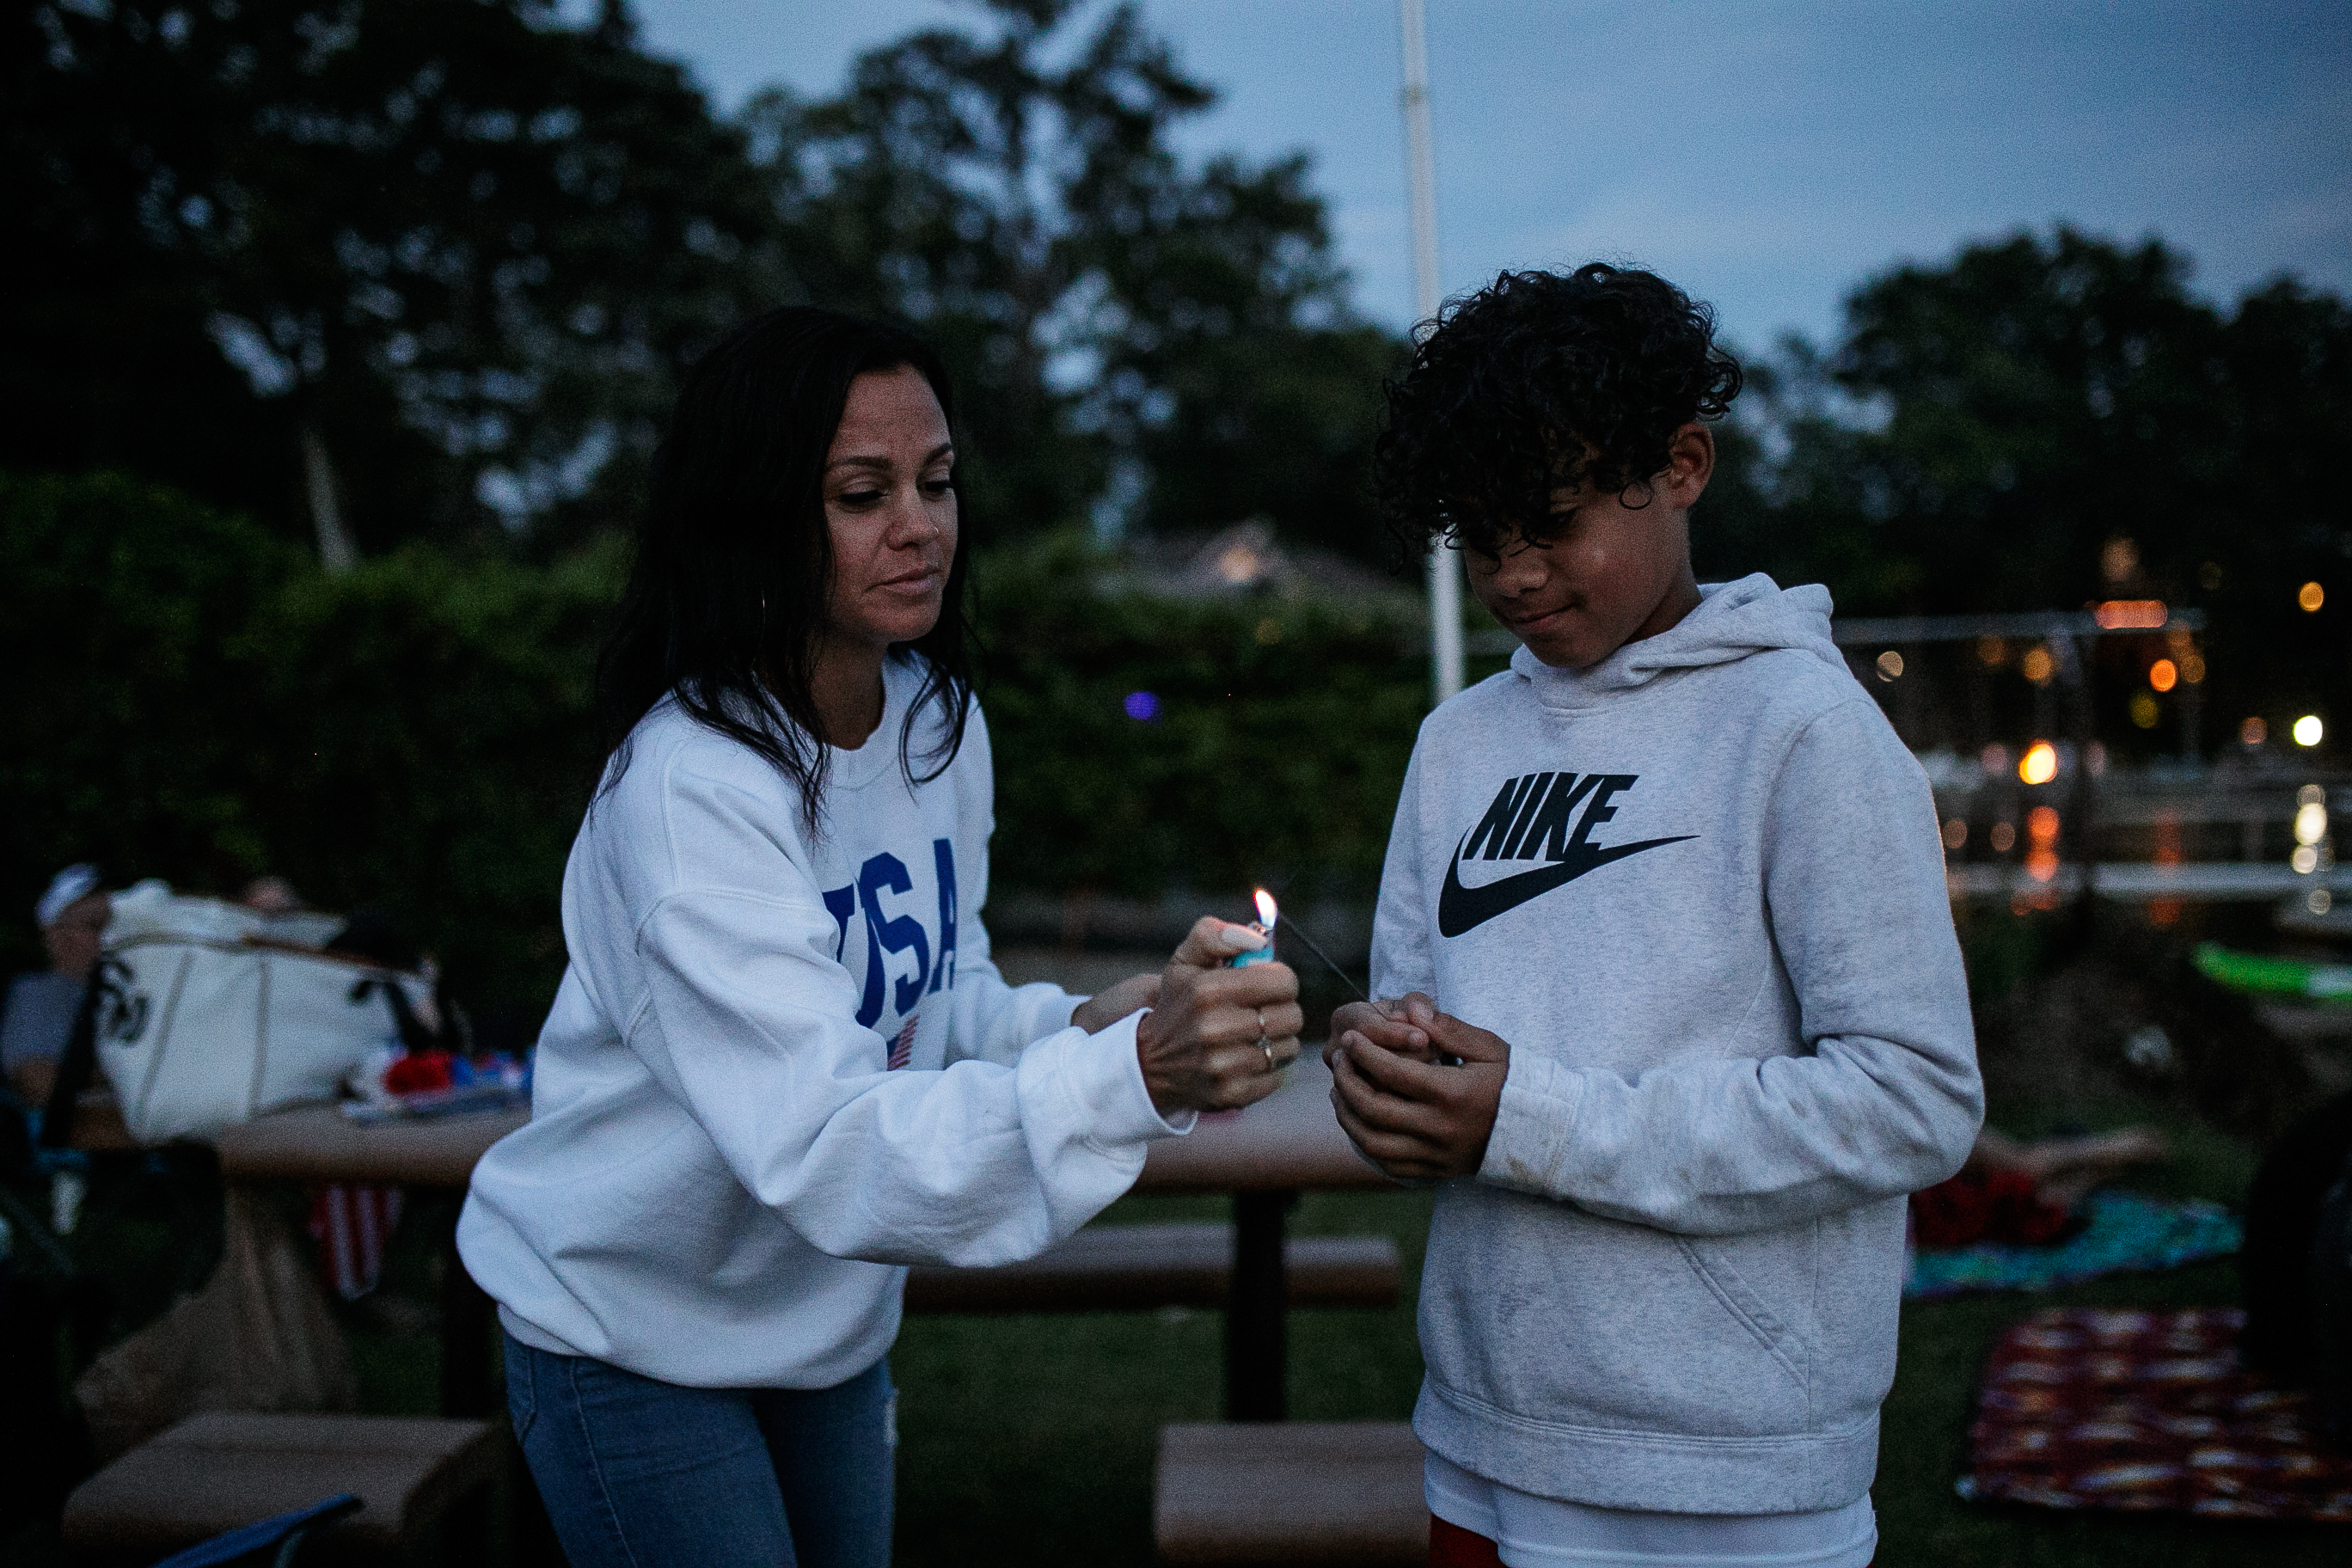 Brodi Jourdan, 10, and his mother Rachel light up a sparkler during the annual Lake Fenton Fireworks on the water in front of the Township hall on Saturday, June 2, 2022 in Fenton Township. (Jenifer Veloso | MLive.com)

